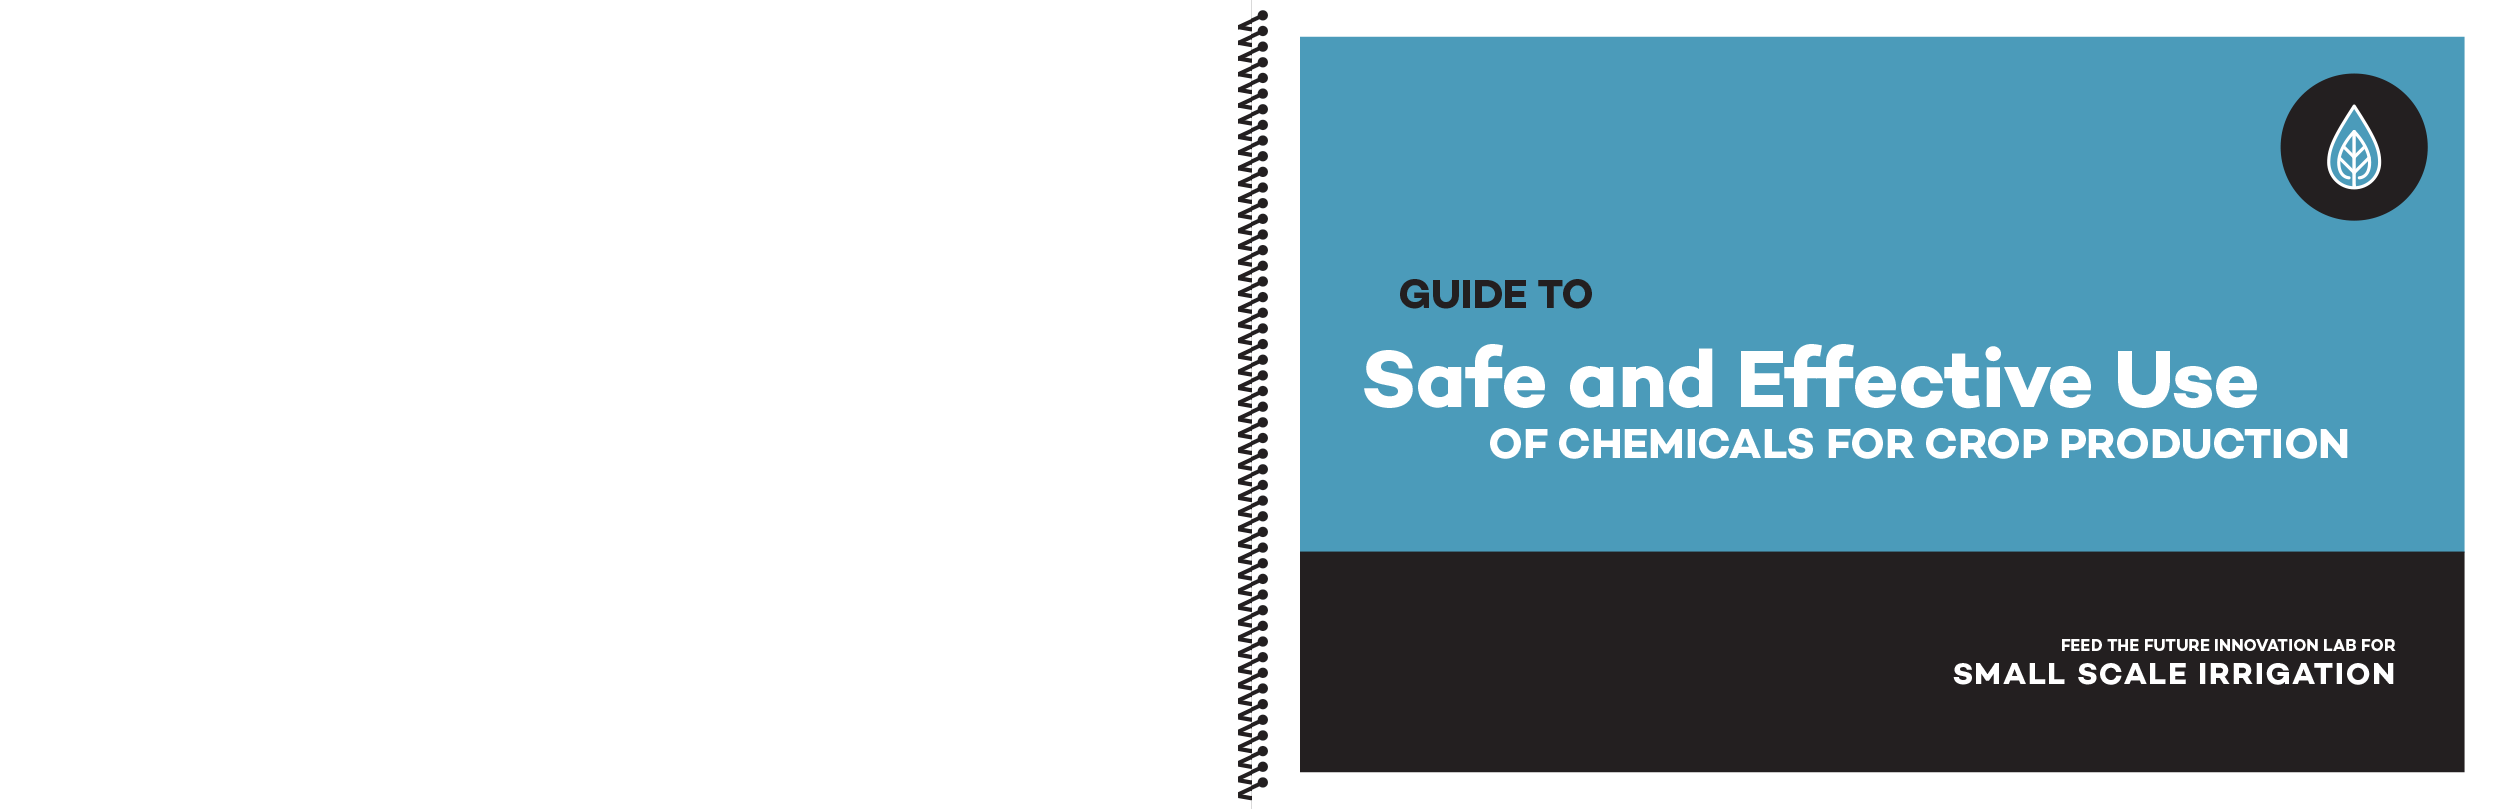 Africa-Agrochemical-Safety-Guide_030122-1.png